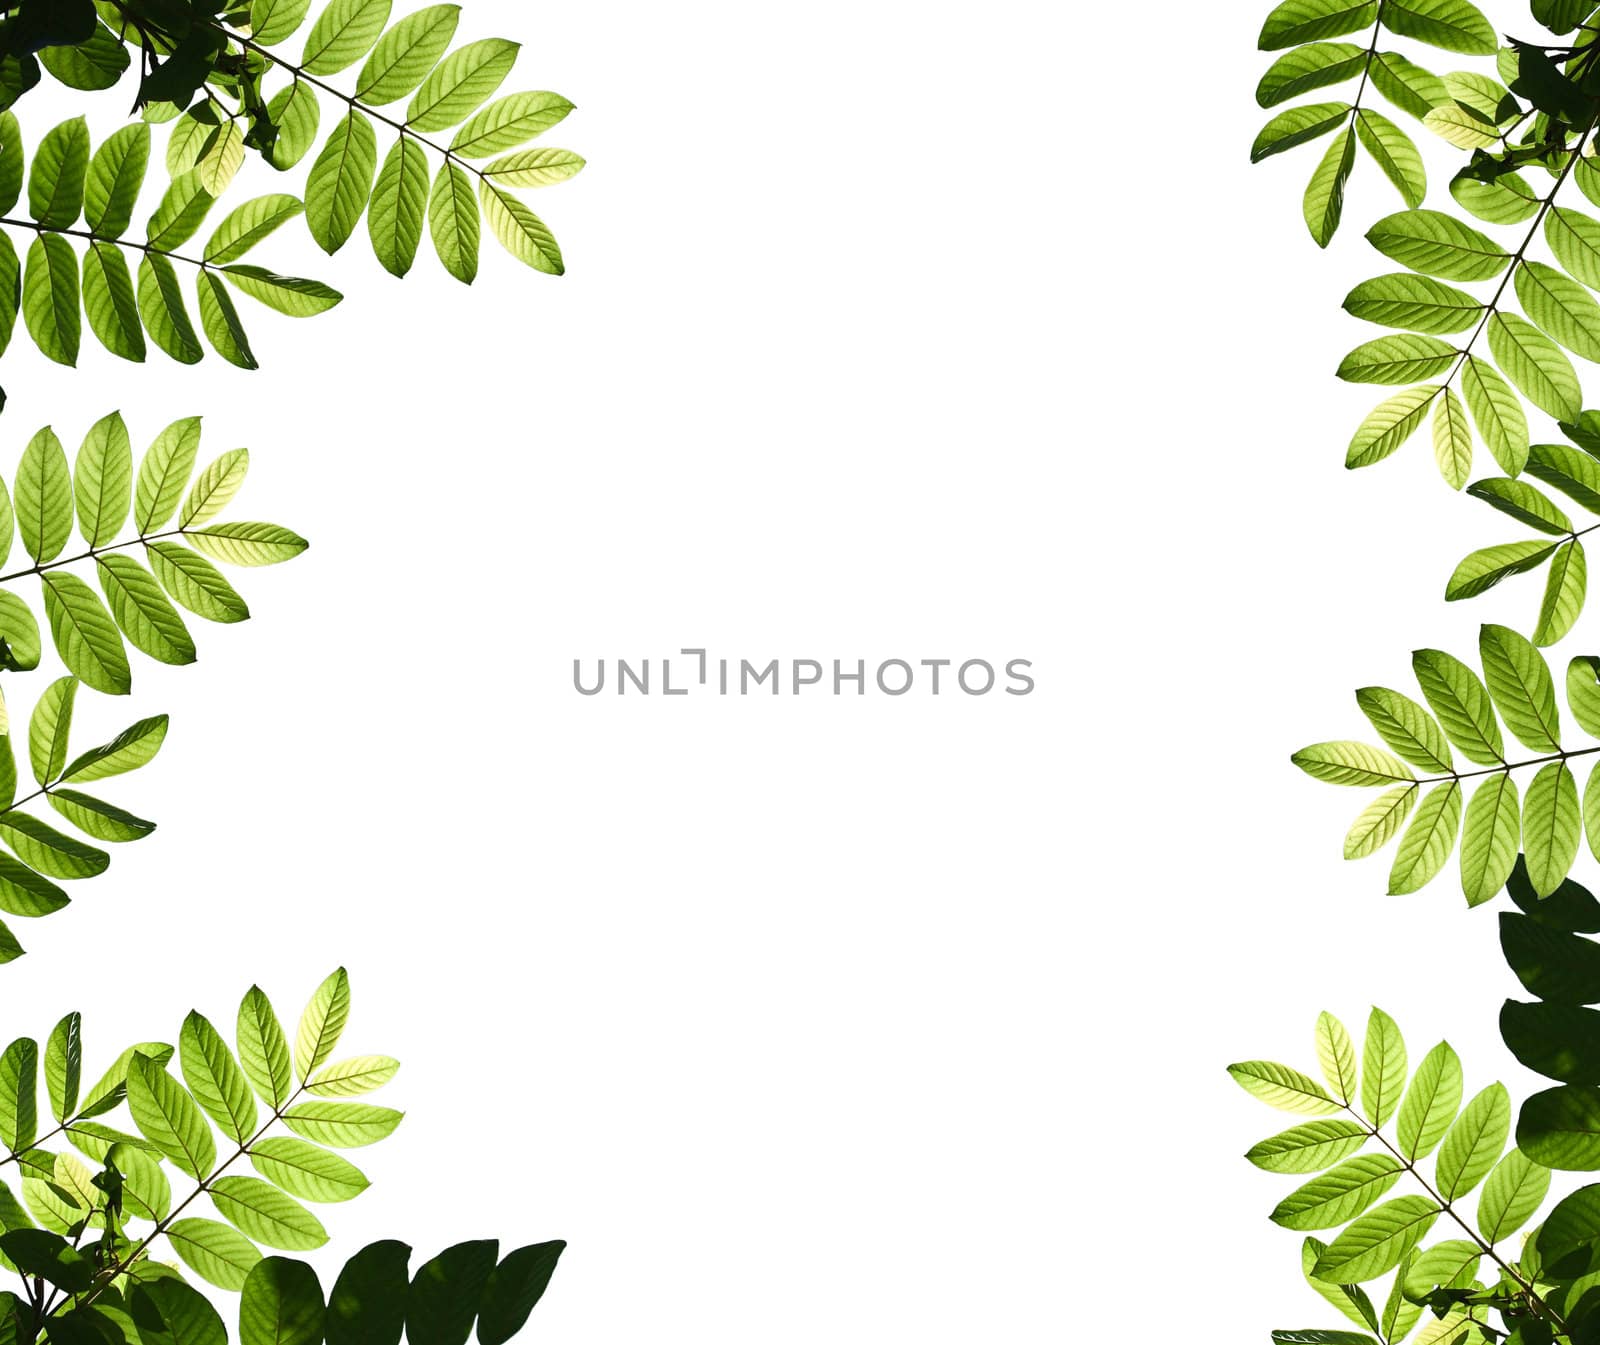 Beautiful green leafs with texture detail isolate on white background